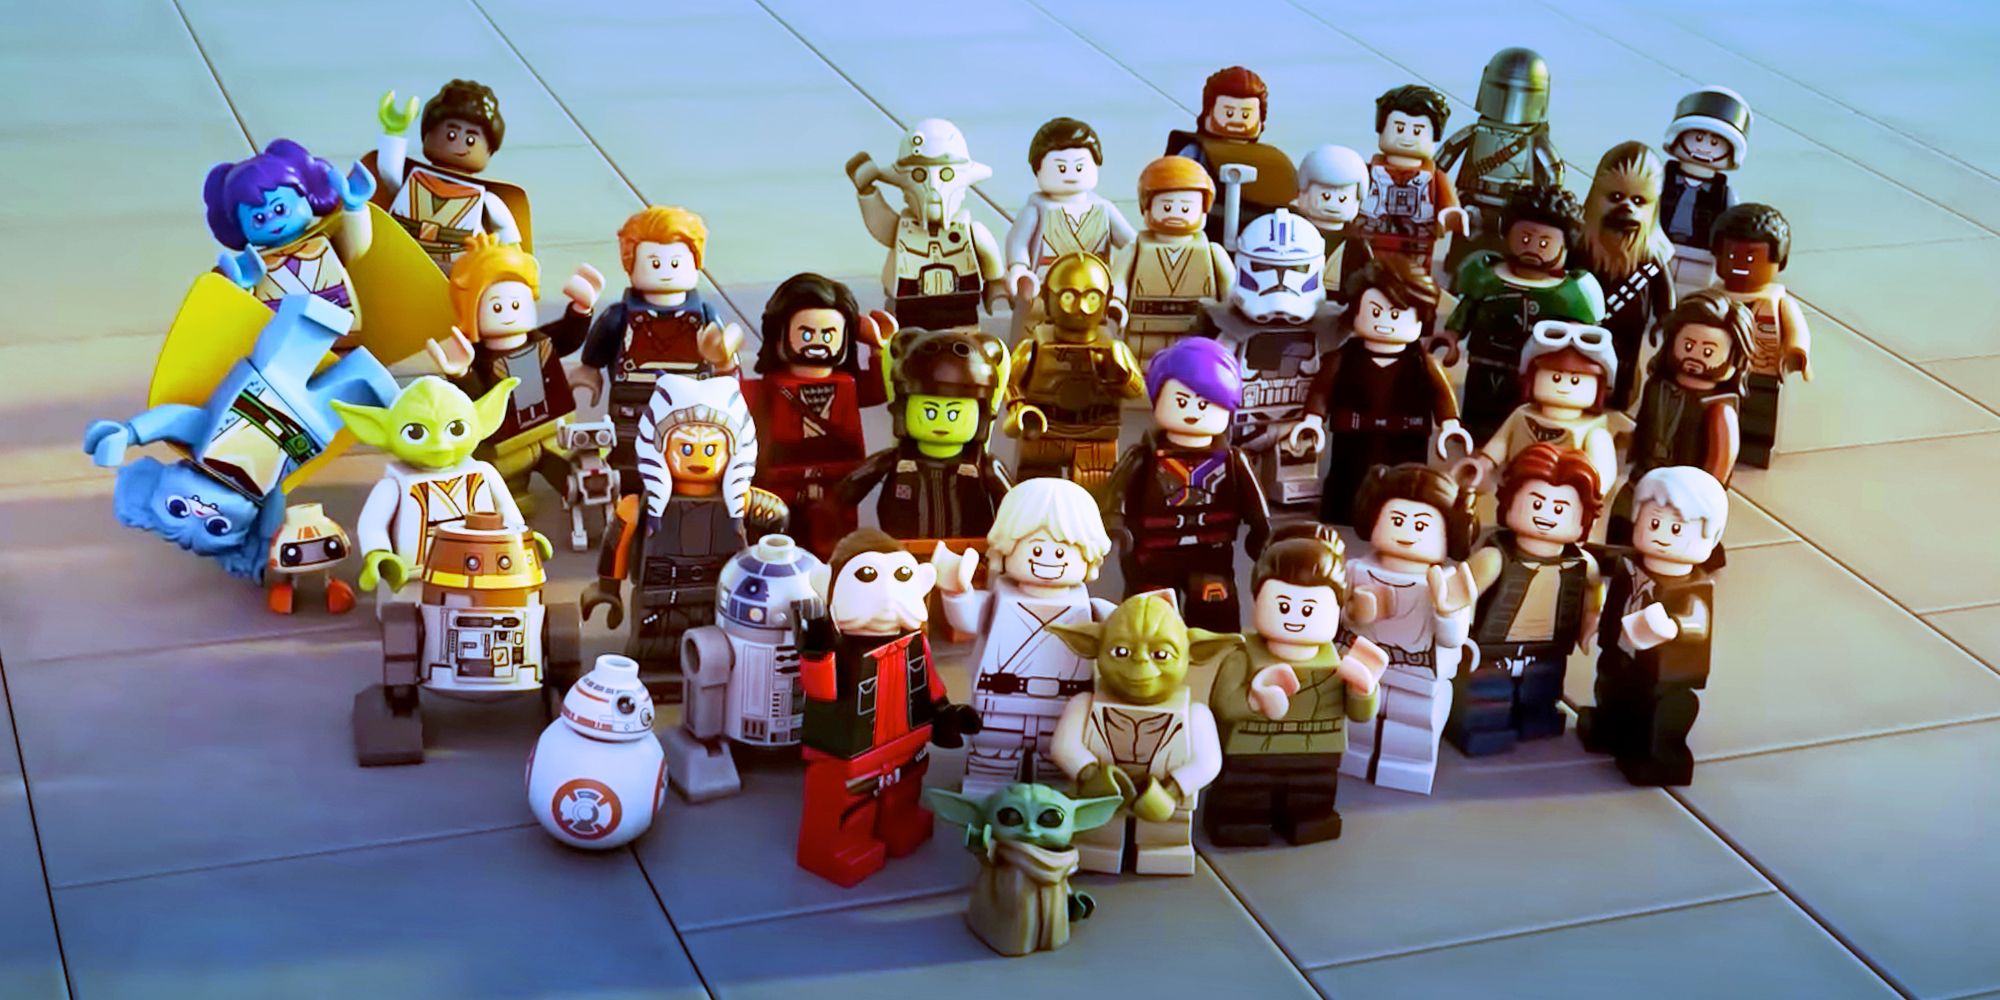 LEGO Star Wars Brings The Franchise's Most Beloved Characters Together In This 25th Anniversary Video